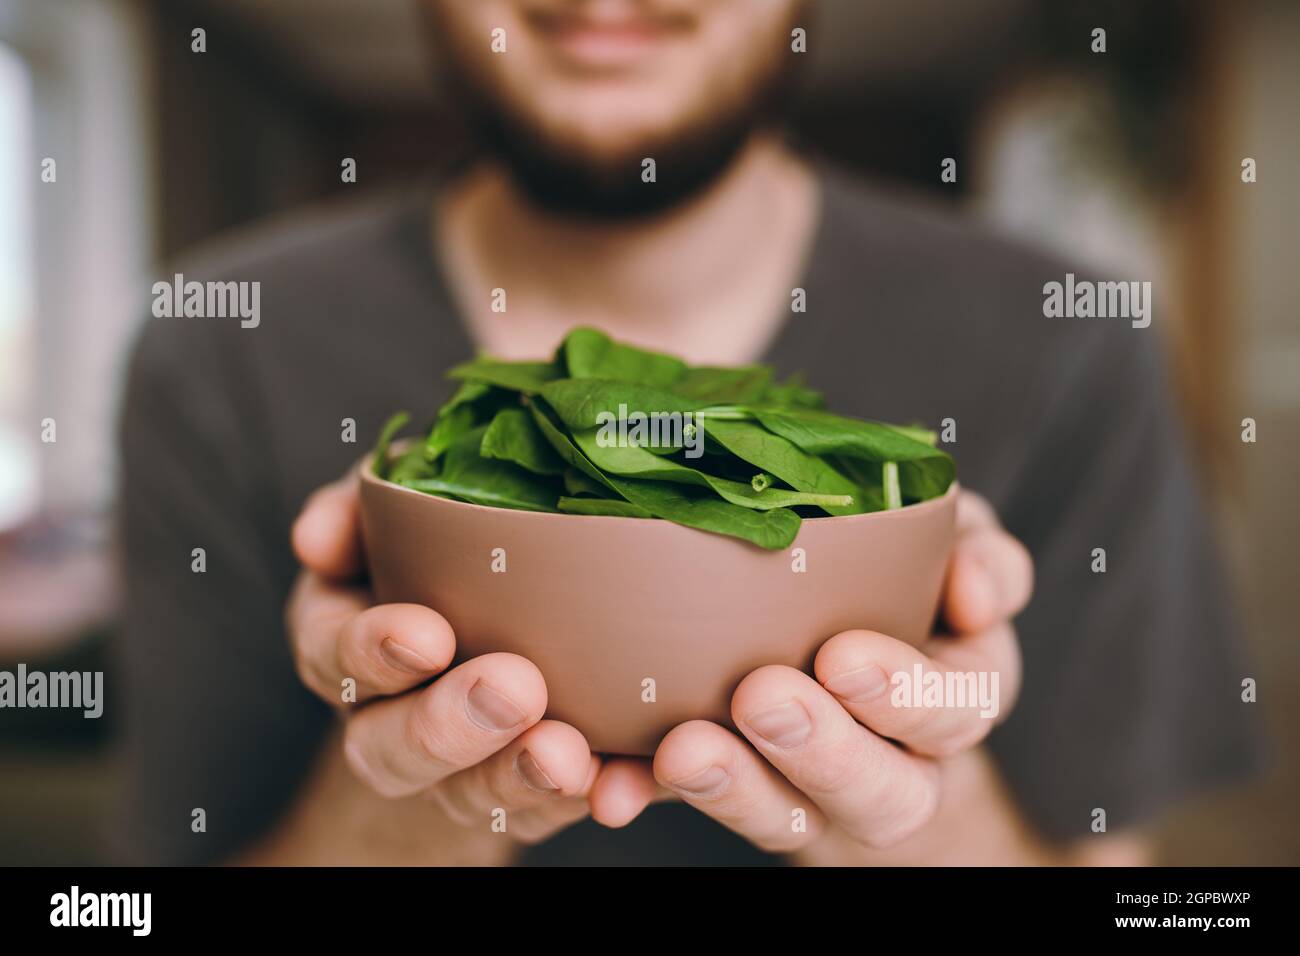 Hands of smiling man holding fresh green salad leaves of spinach on blurred background. Healthy vegetarian eating concept. Green leaves of spinach. Gi Stock Photo